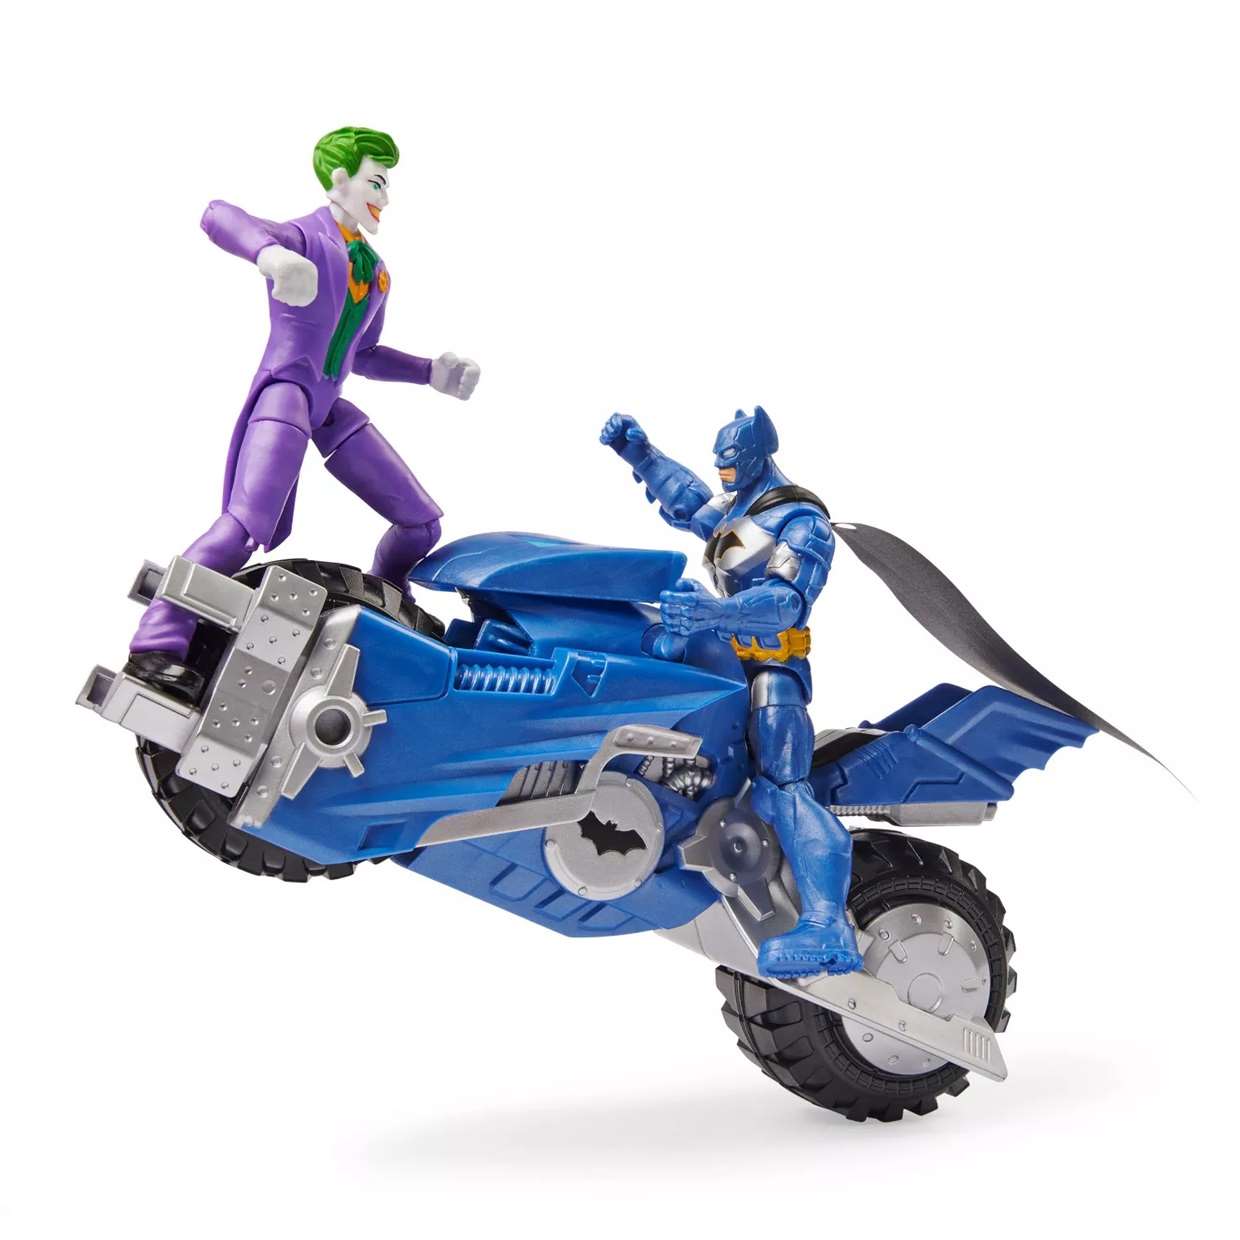 Batcycle The Joker Vs Batman The Caped Crusader Exclusivo  Only Target